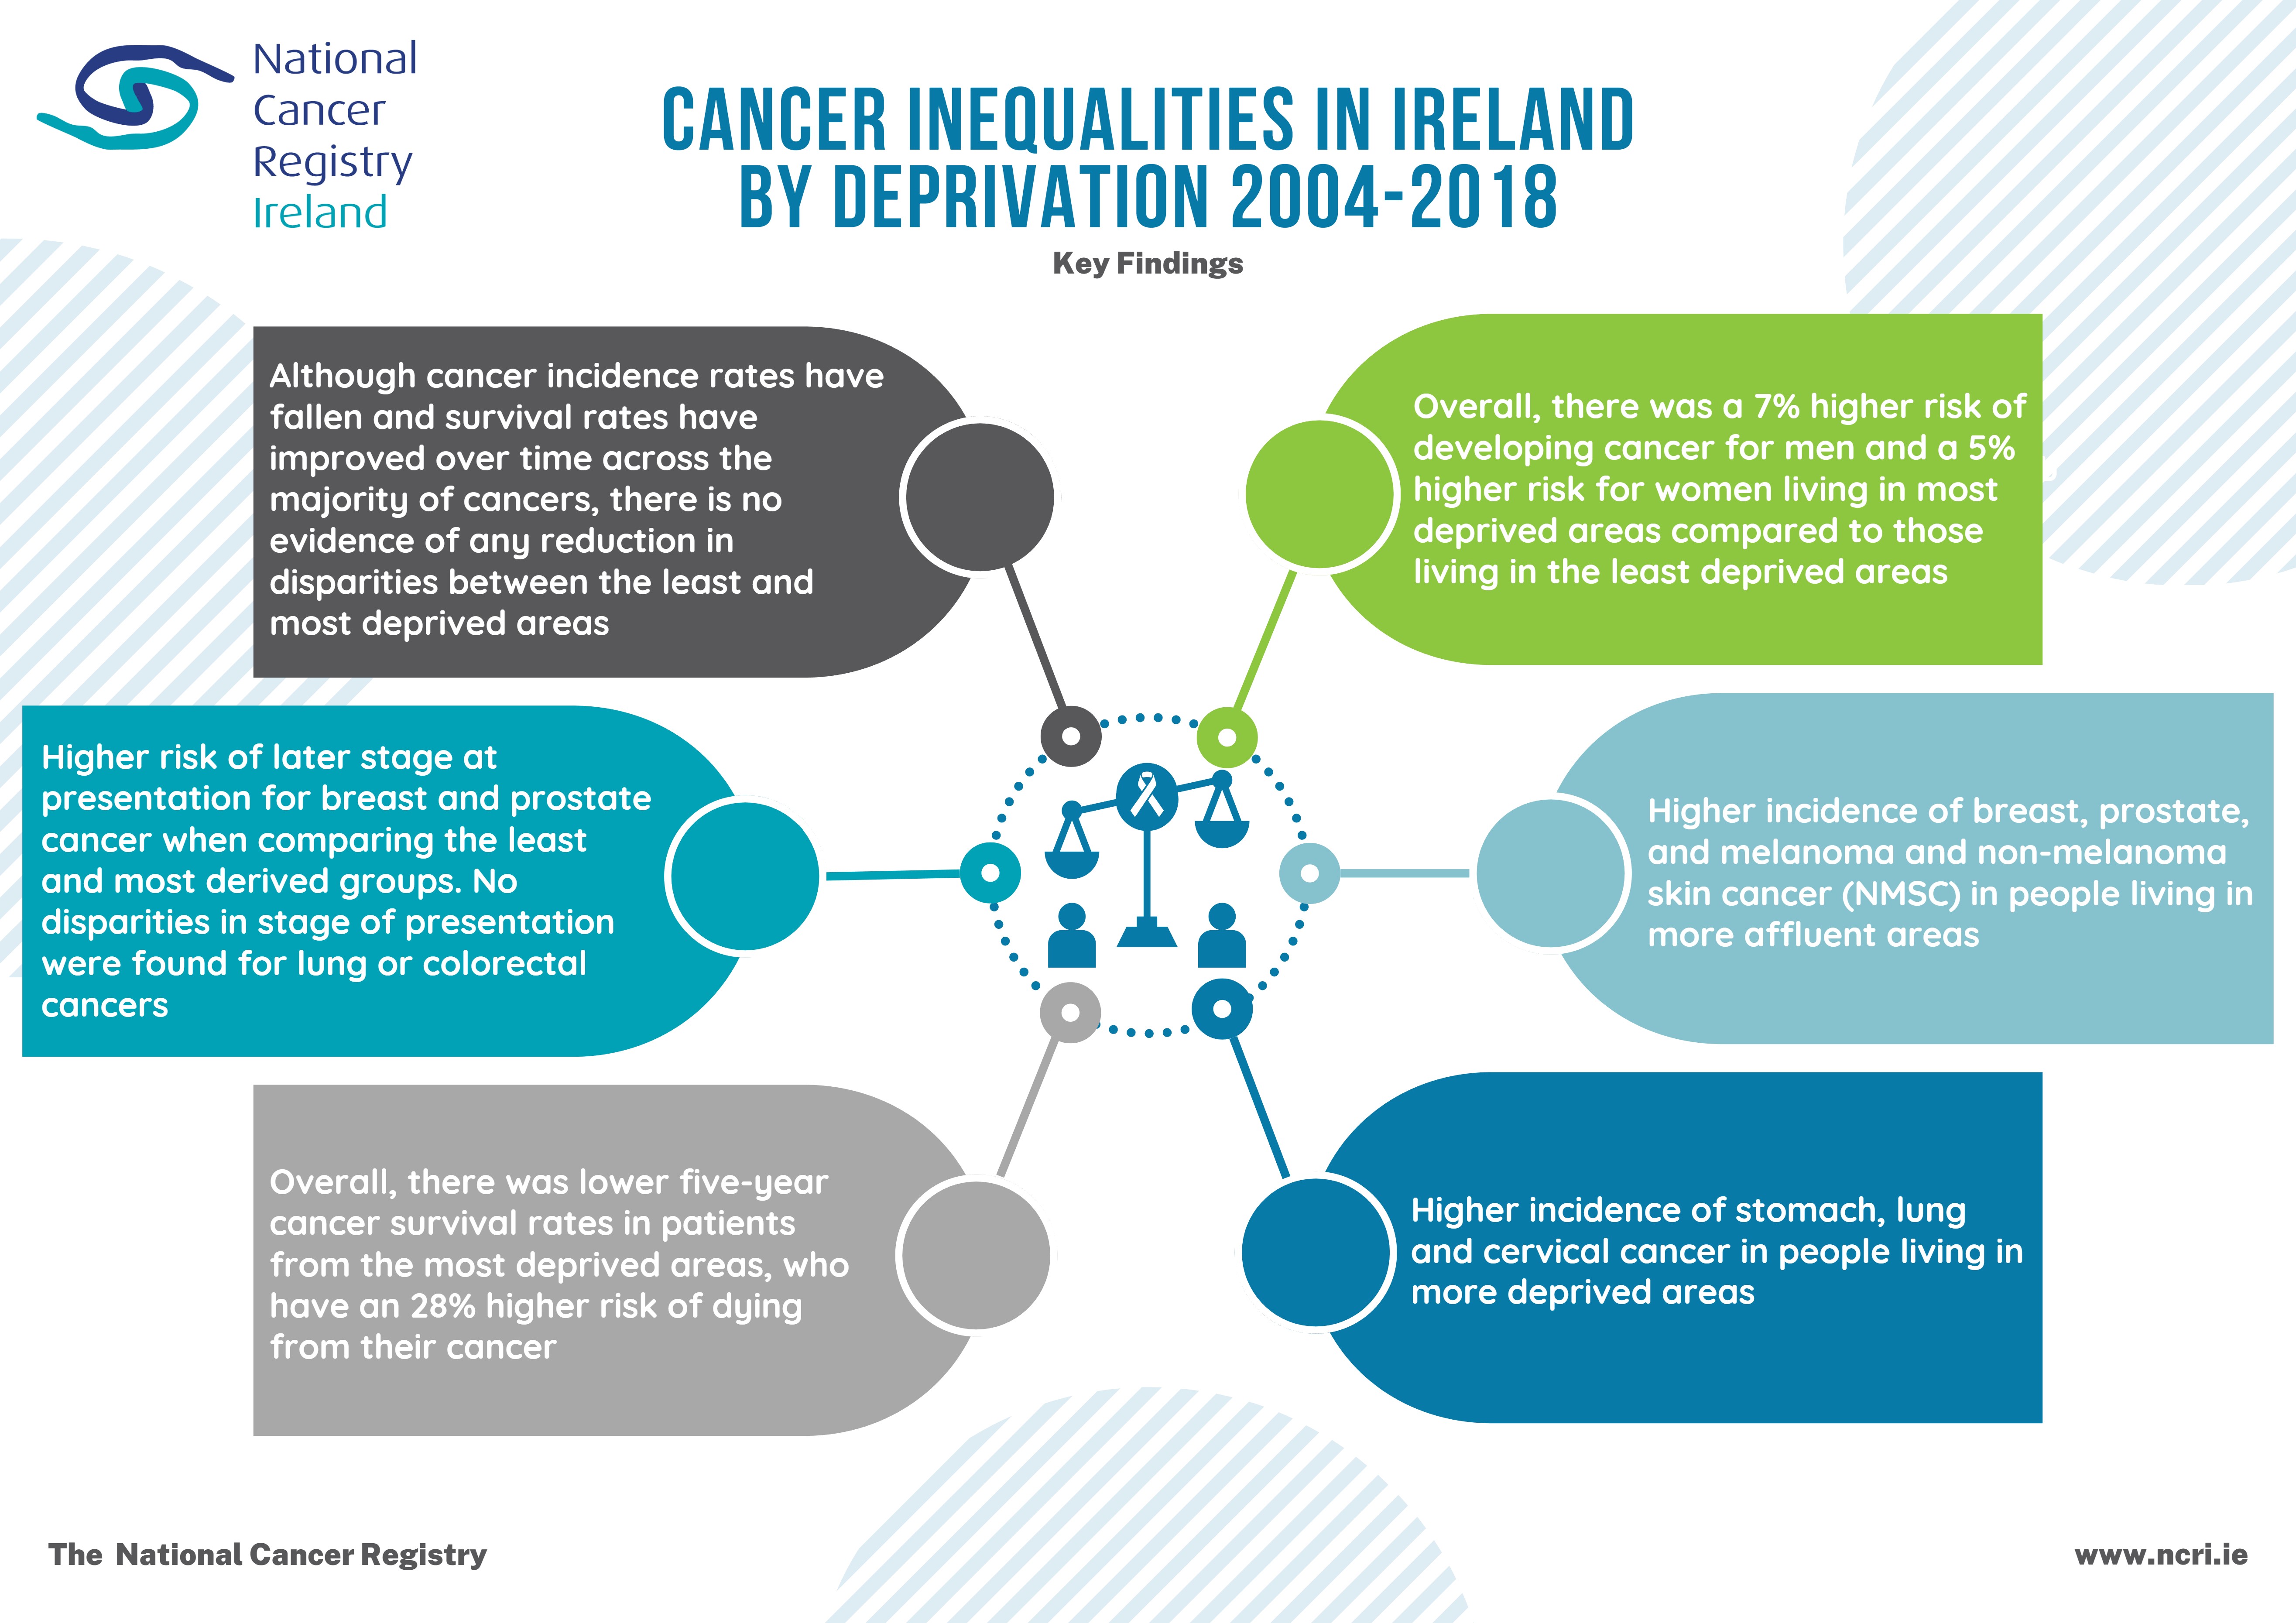 Key Findings: Cancer Inequalities in Ireland By Deprivation 2004-2018